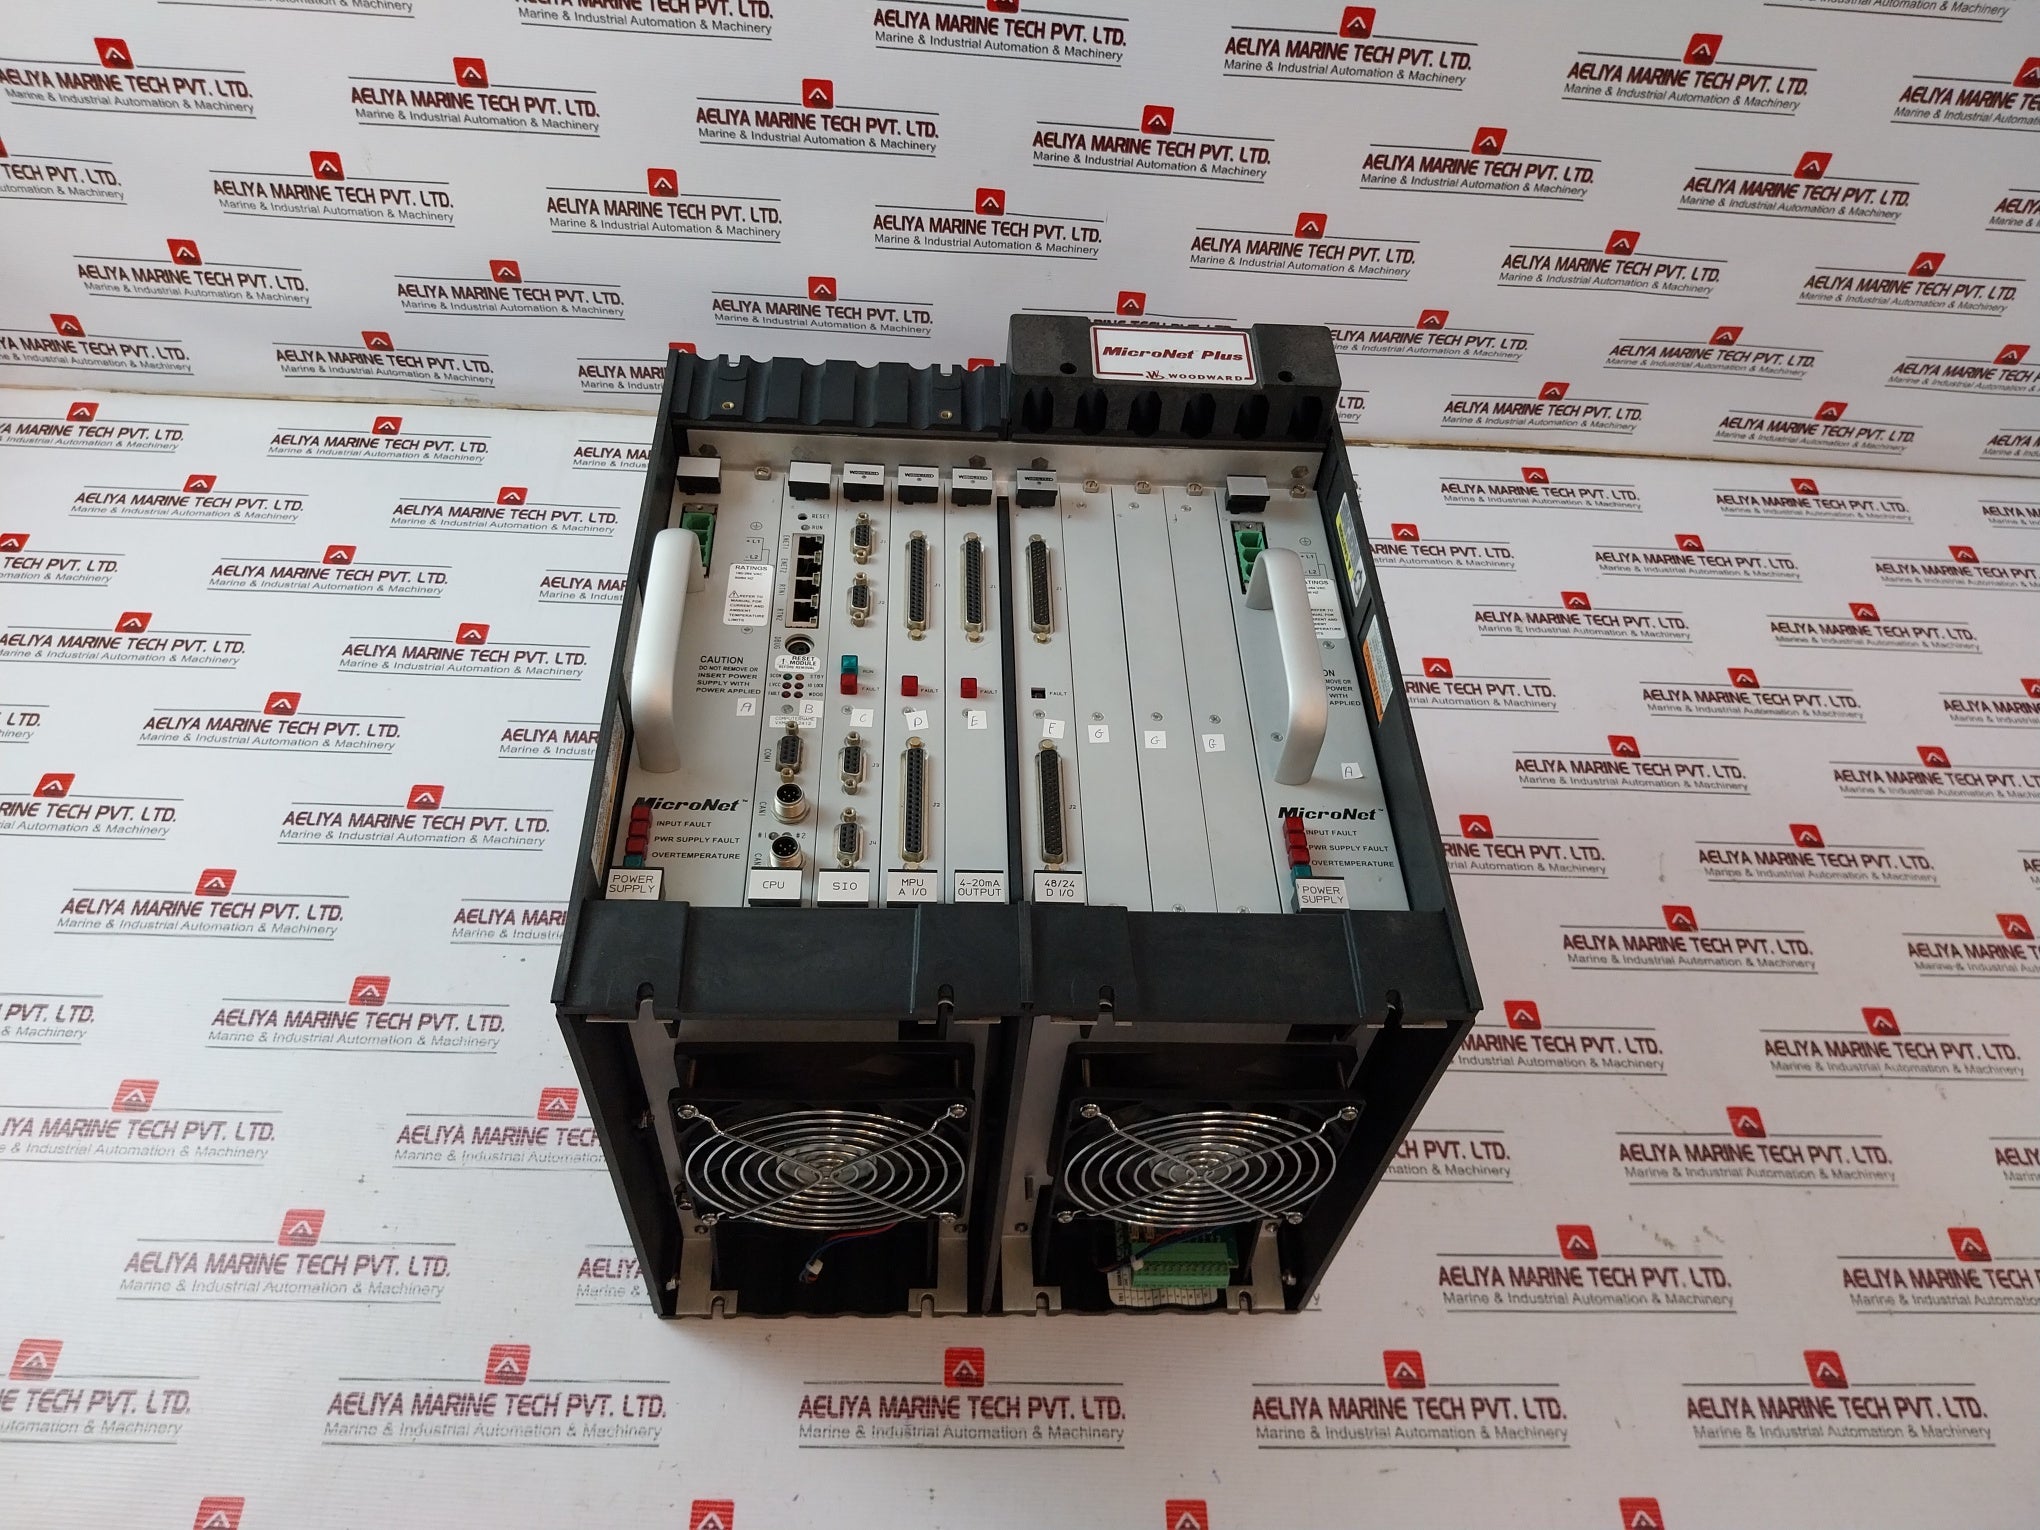 Micronet Plus Woodward 5 Slots With 8 Slot Chassis High Performance Control Unit